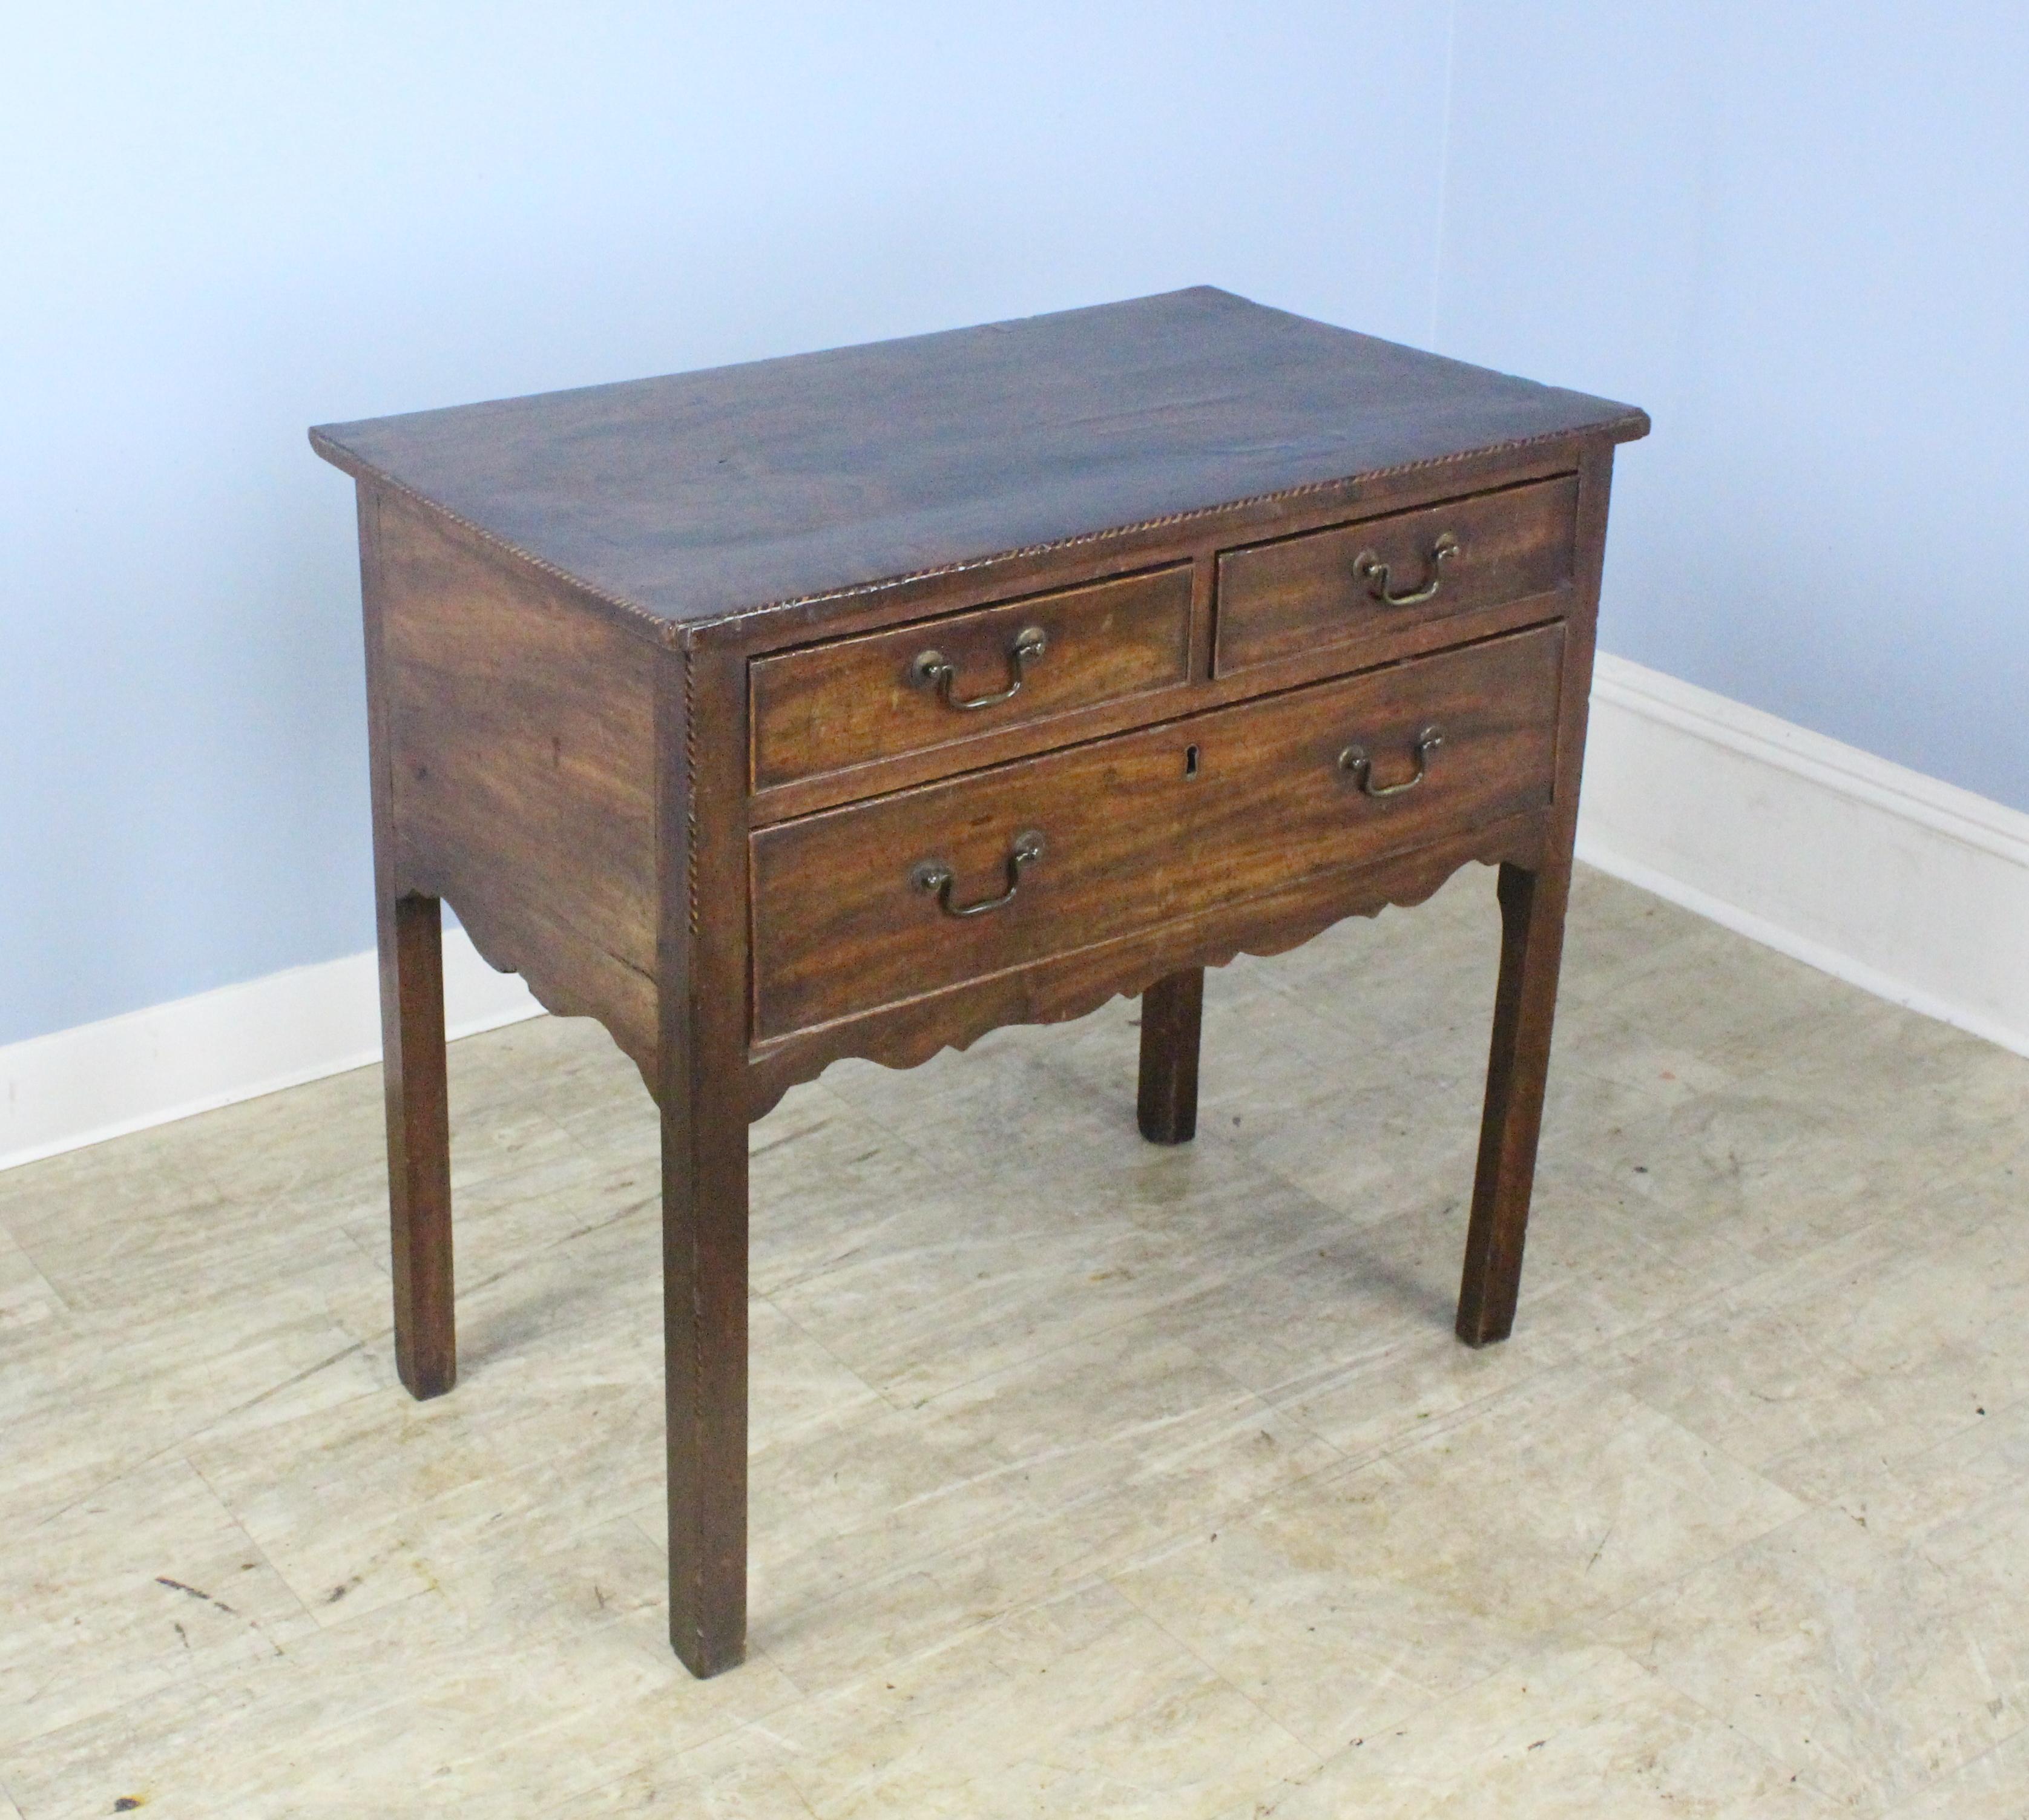 An early lowboy with a veneered rosewood top, intricate ebony and satinwood stringing, and a fancifully carved apron, all in fabulous original distressed condition. The cockbeaded drawers and original brass hardware complete the look. The bottom